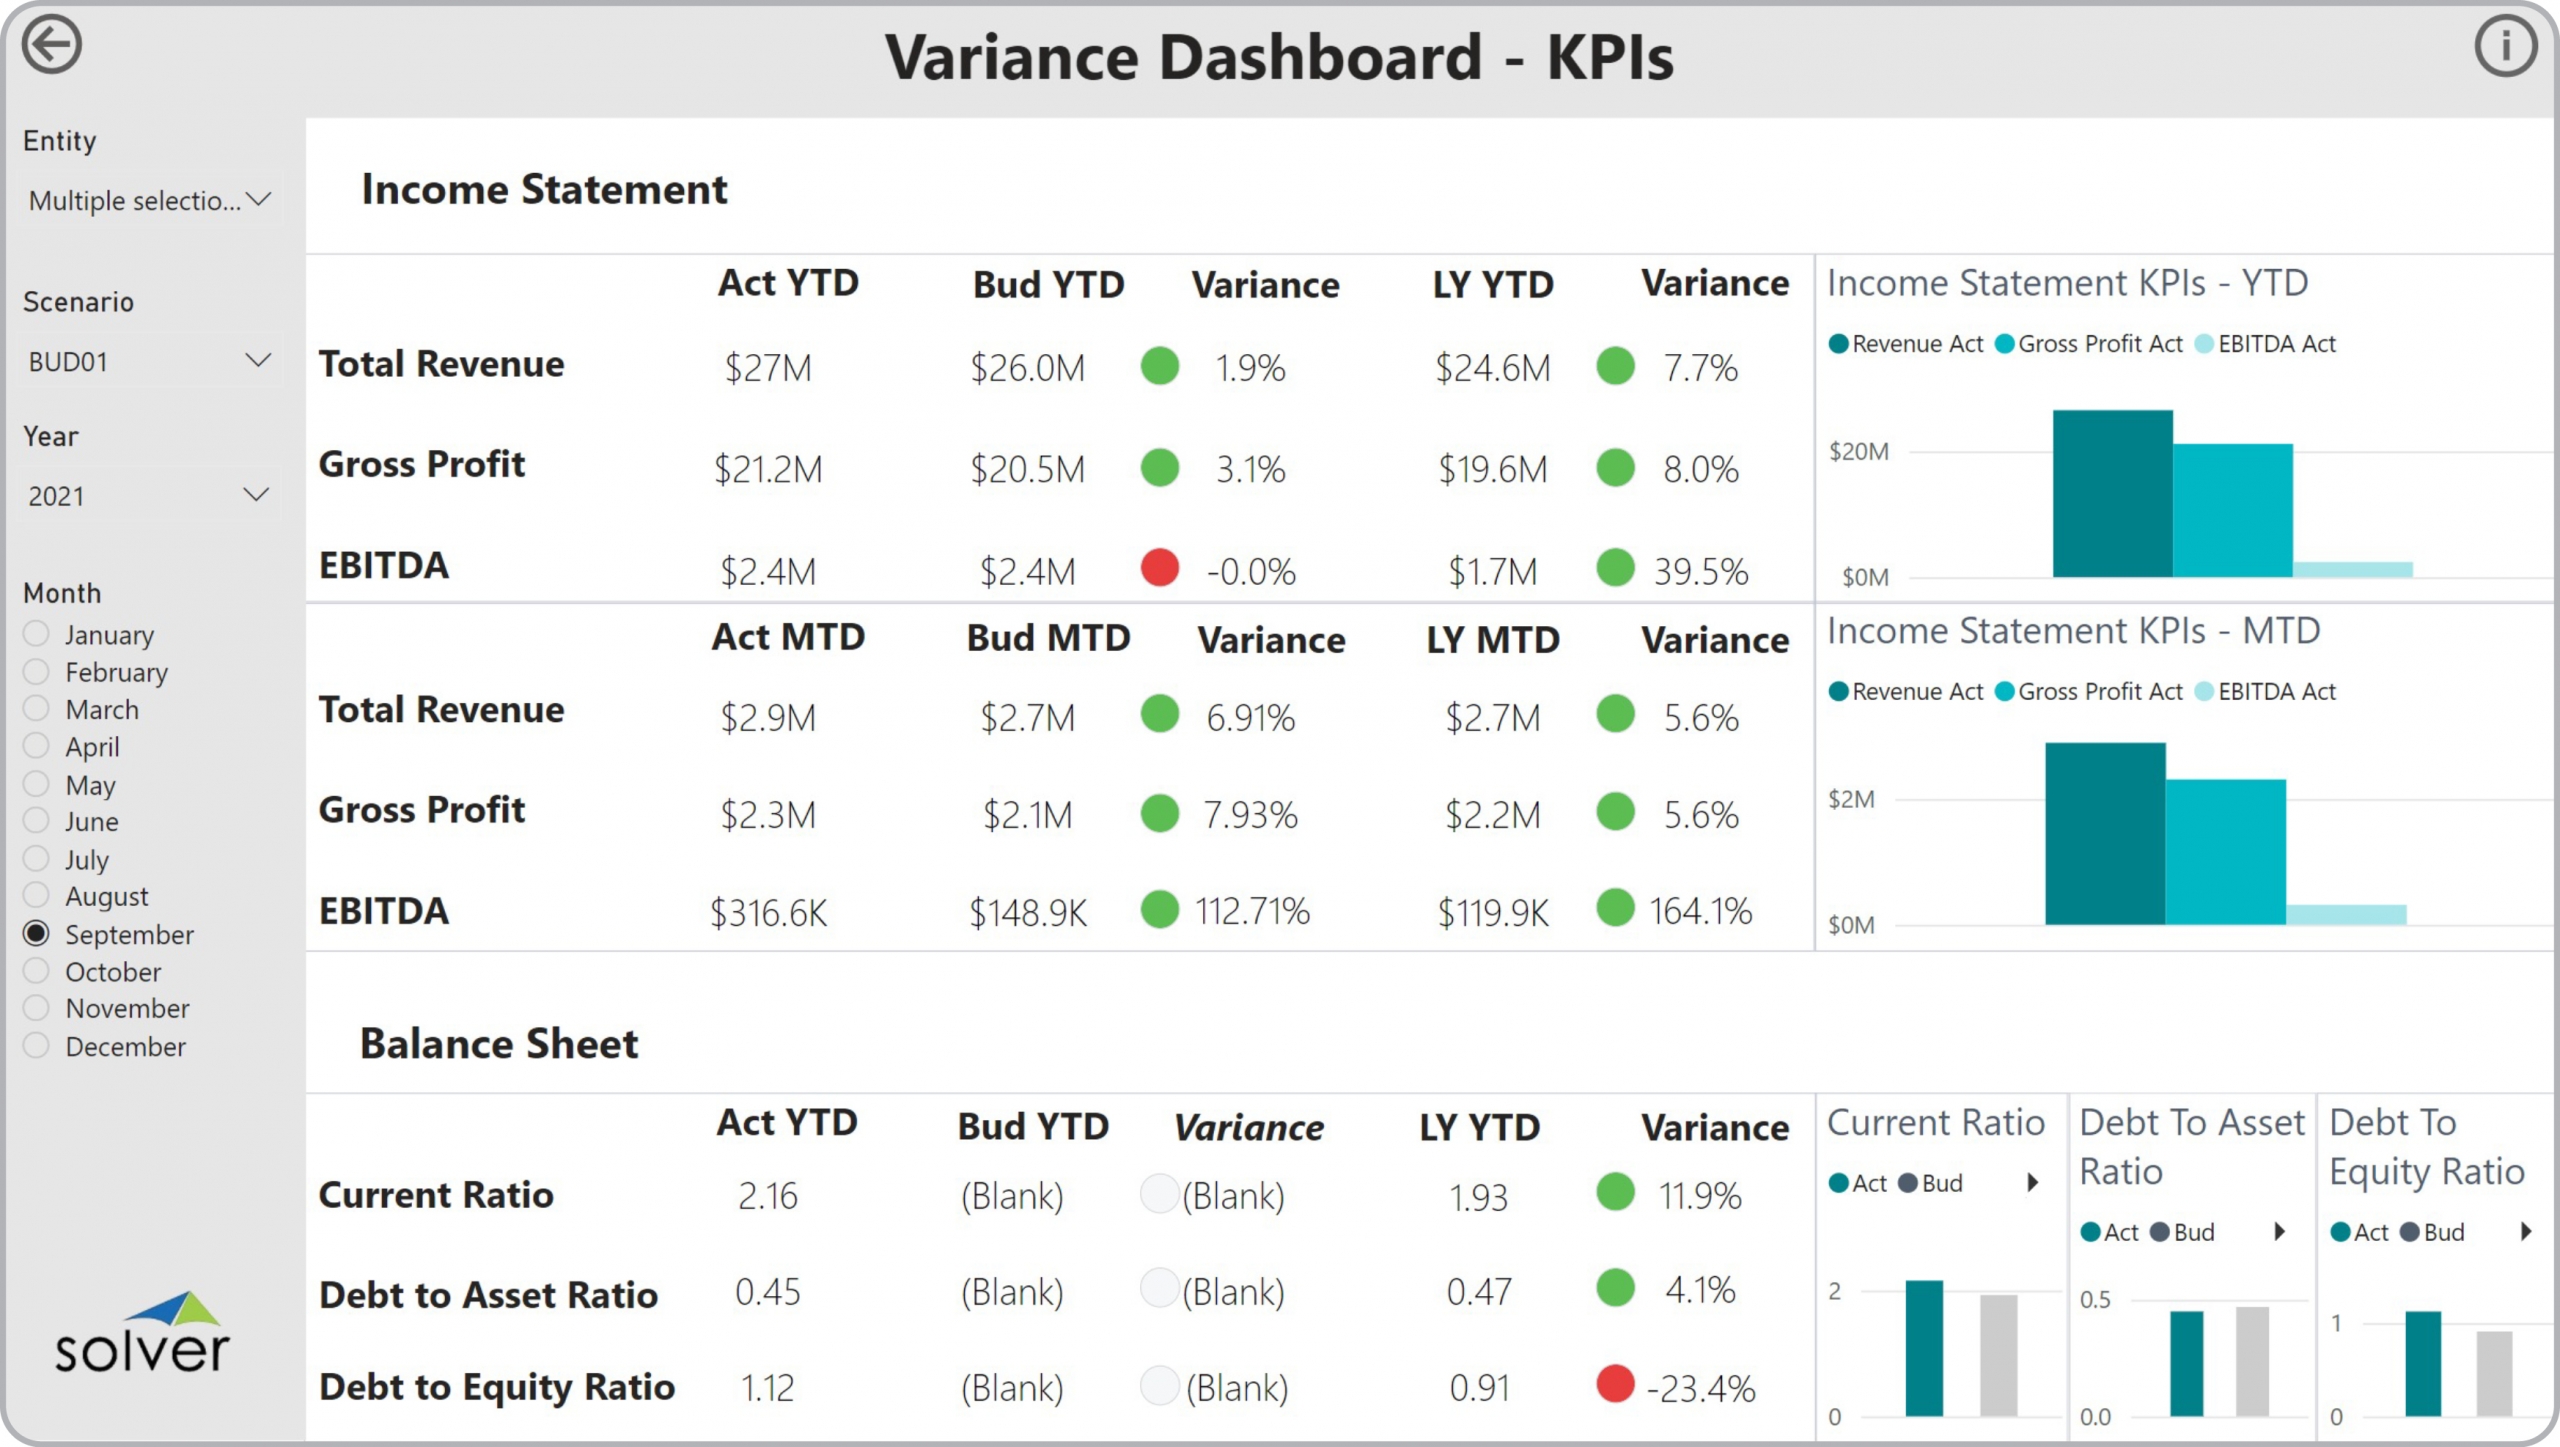 Example of a Financial KPI Variance Dashboard to Streamline the Monthly Analysis Process